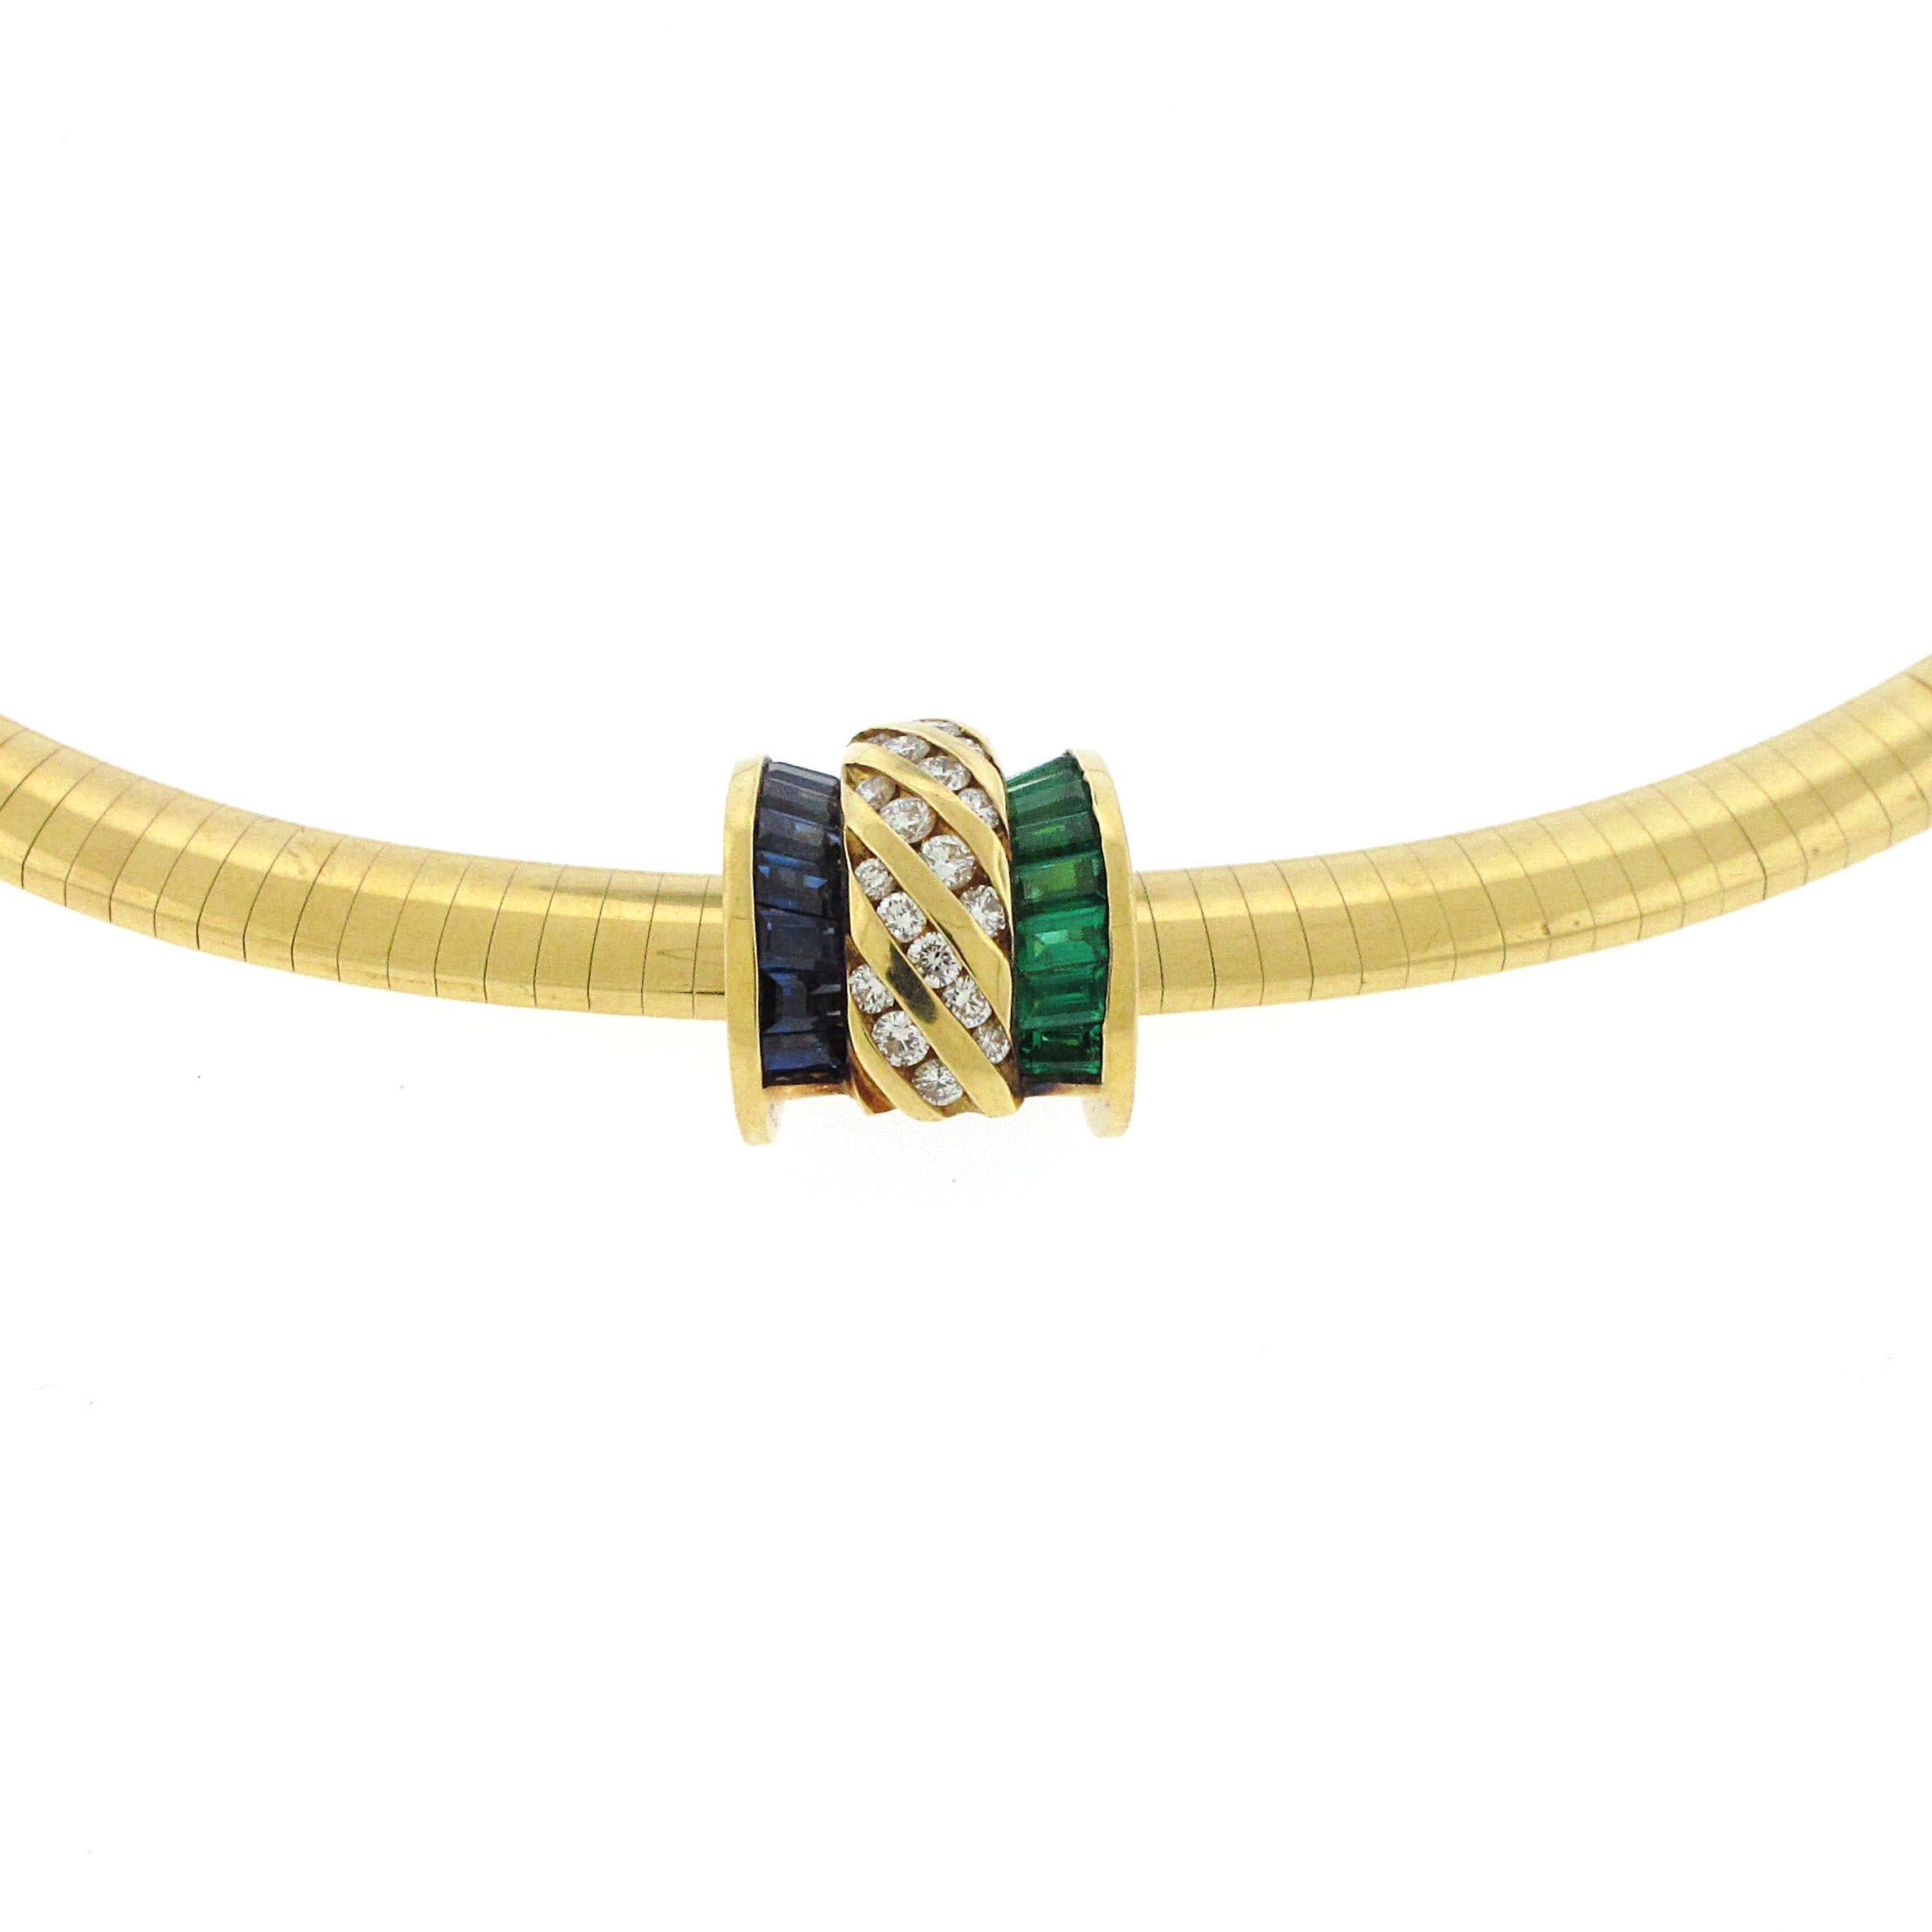 Fantastic 18kt Yellow Gold Charles Krypell slide necklace. Approximately 3 carats of emeralds and sapphires adorned with .60 carats of fine white diamonds. 

Charles Krypell is an American Jeweler starting in 1962 and crafting excellently made